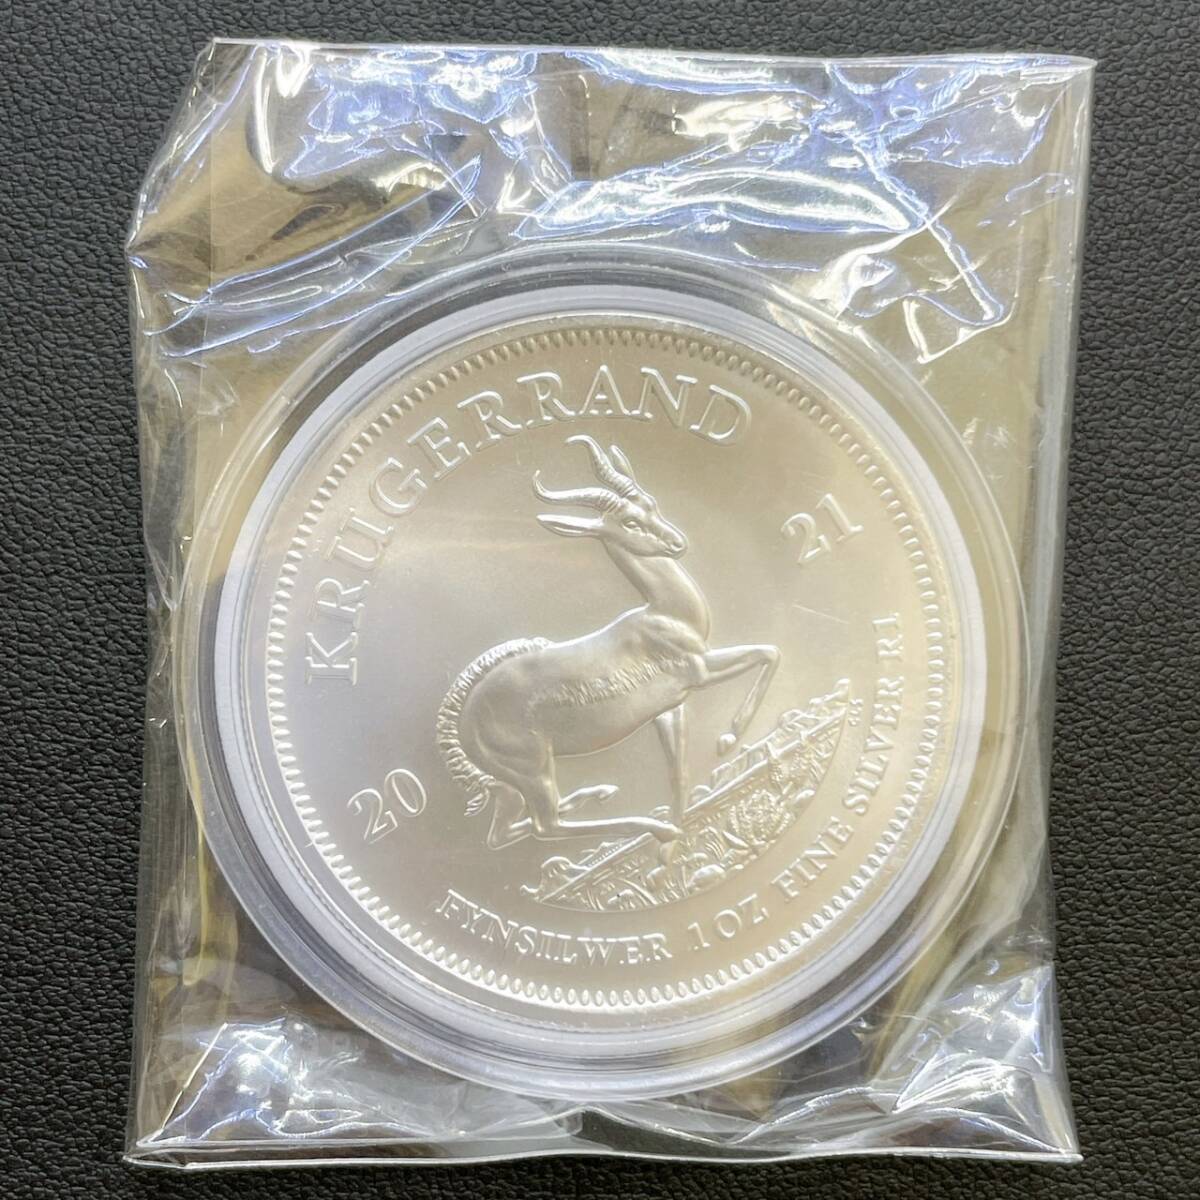 [DHS2787AT] Crew Galland 2021 year south Africa silver coin 31.1g 1 ounce 1oz silver coin original silver clear case have 